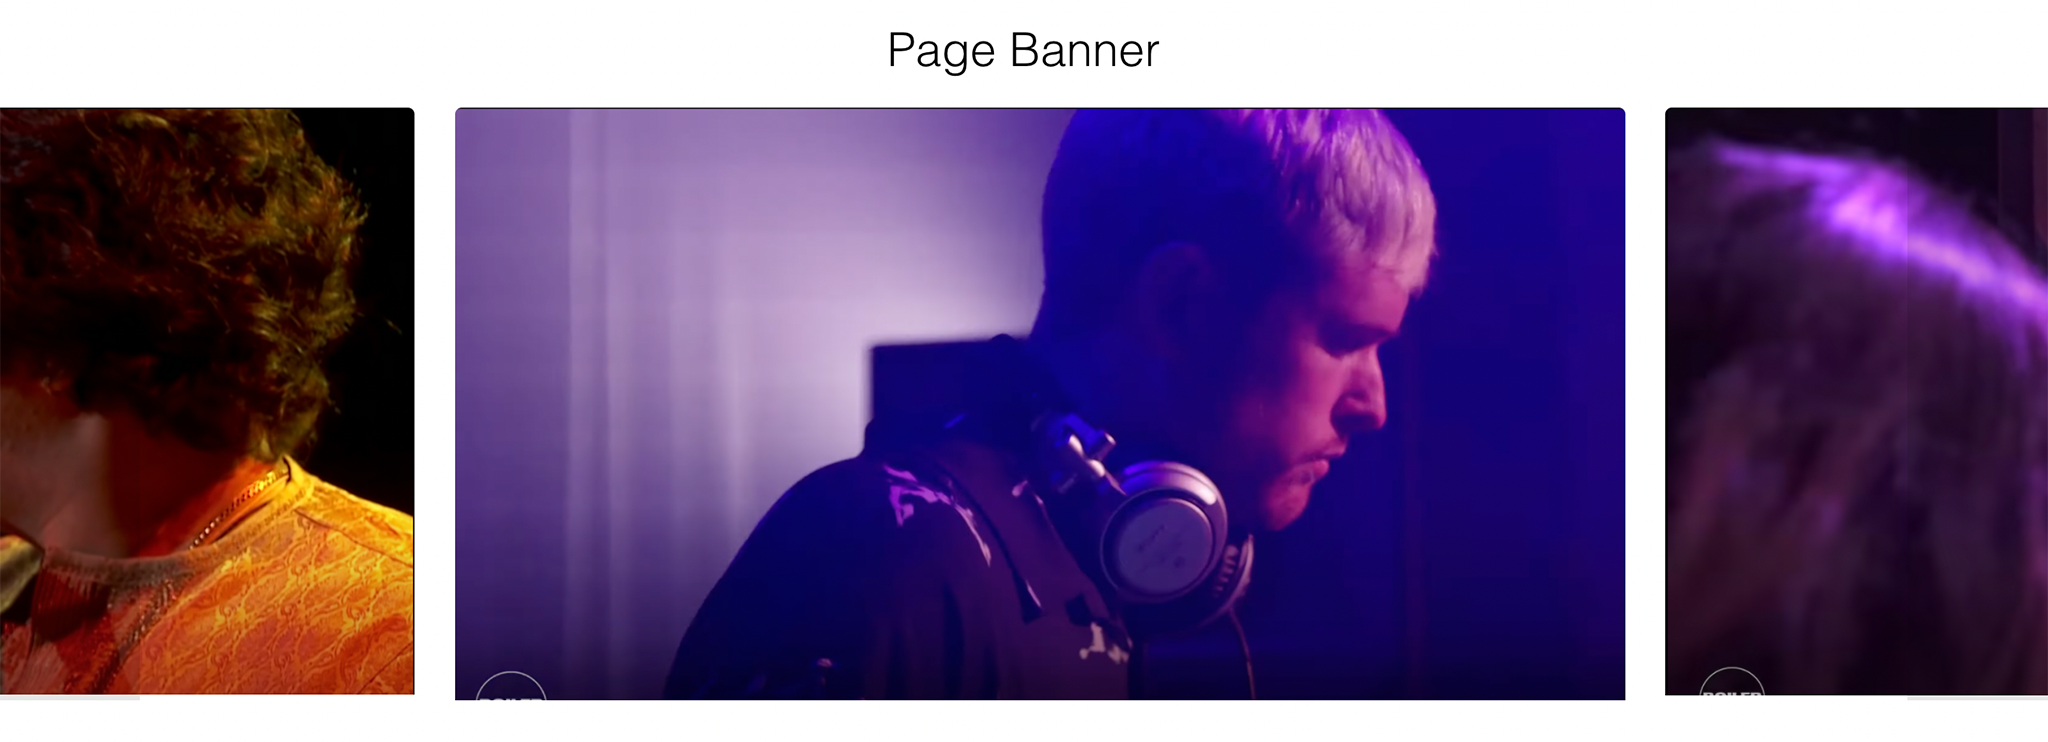 PageBanner_view_mode